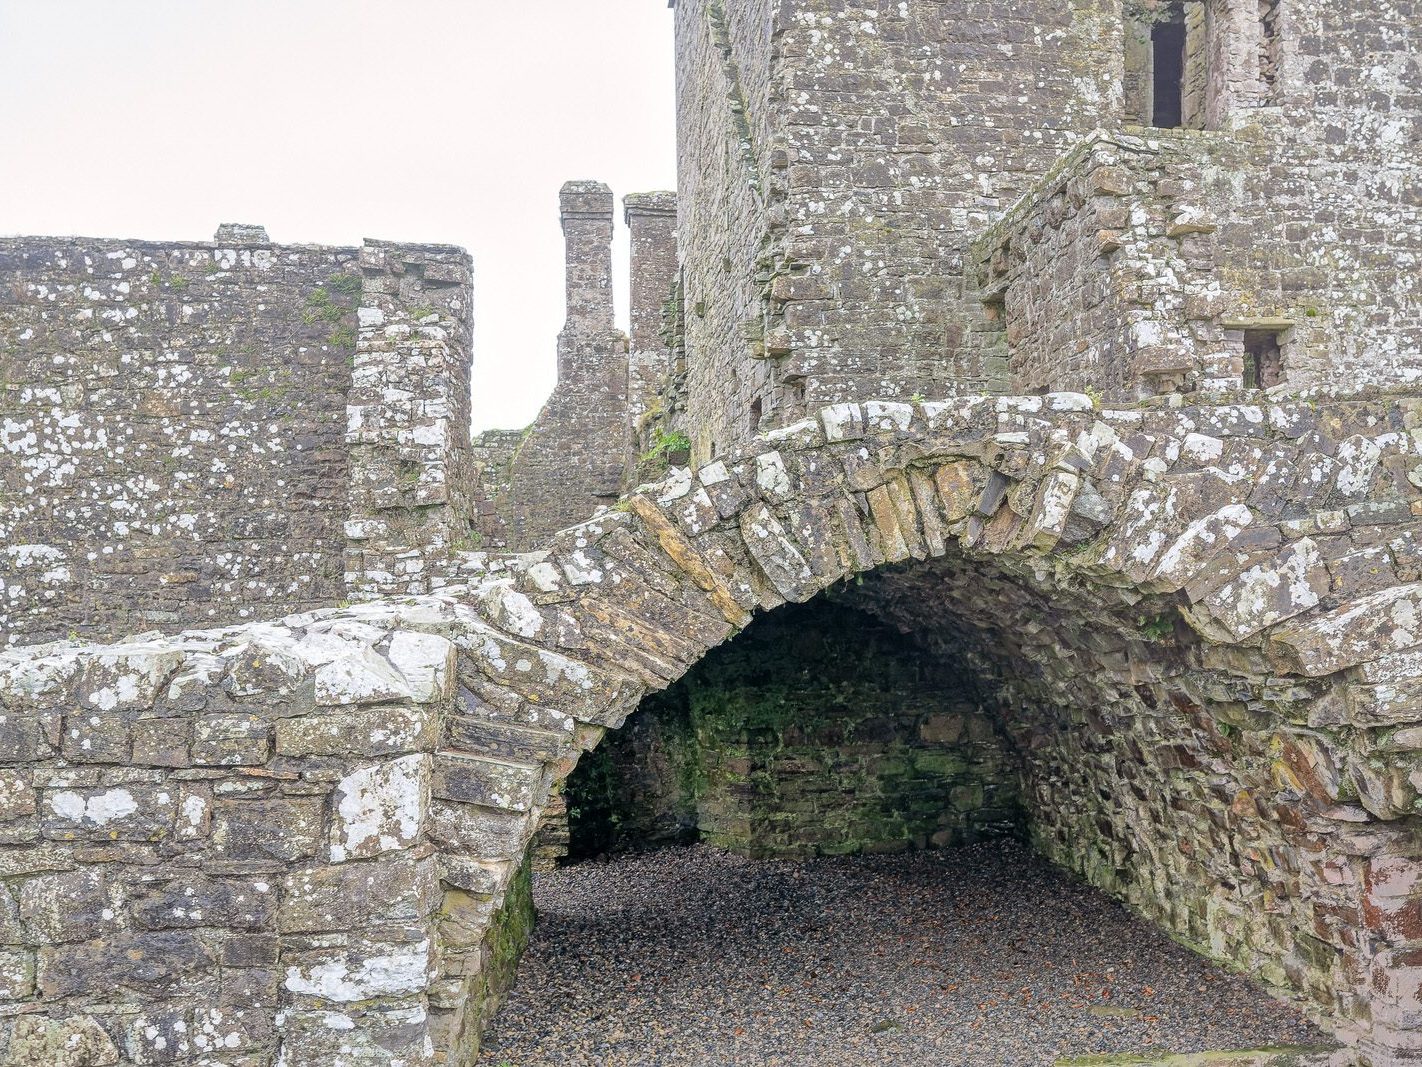 BECTIVE ABBEY WHICH I VISITED LAST CHRISTMAS [THERE WERE NO OTHER VISITORS AS IT WAS A VERY WET DAY]--225250-1